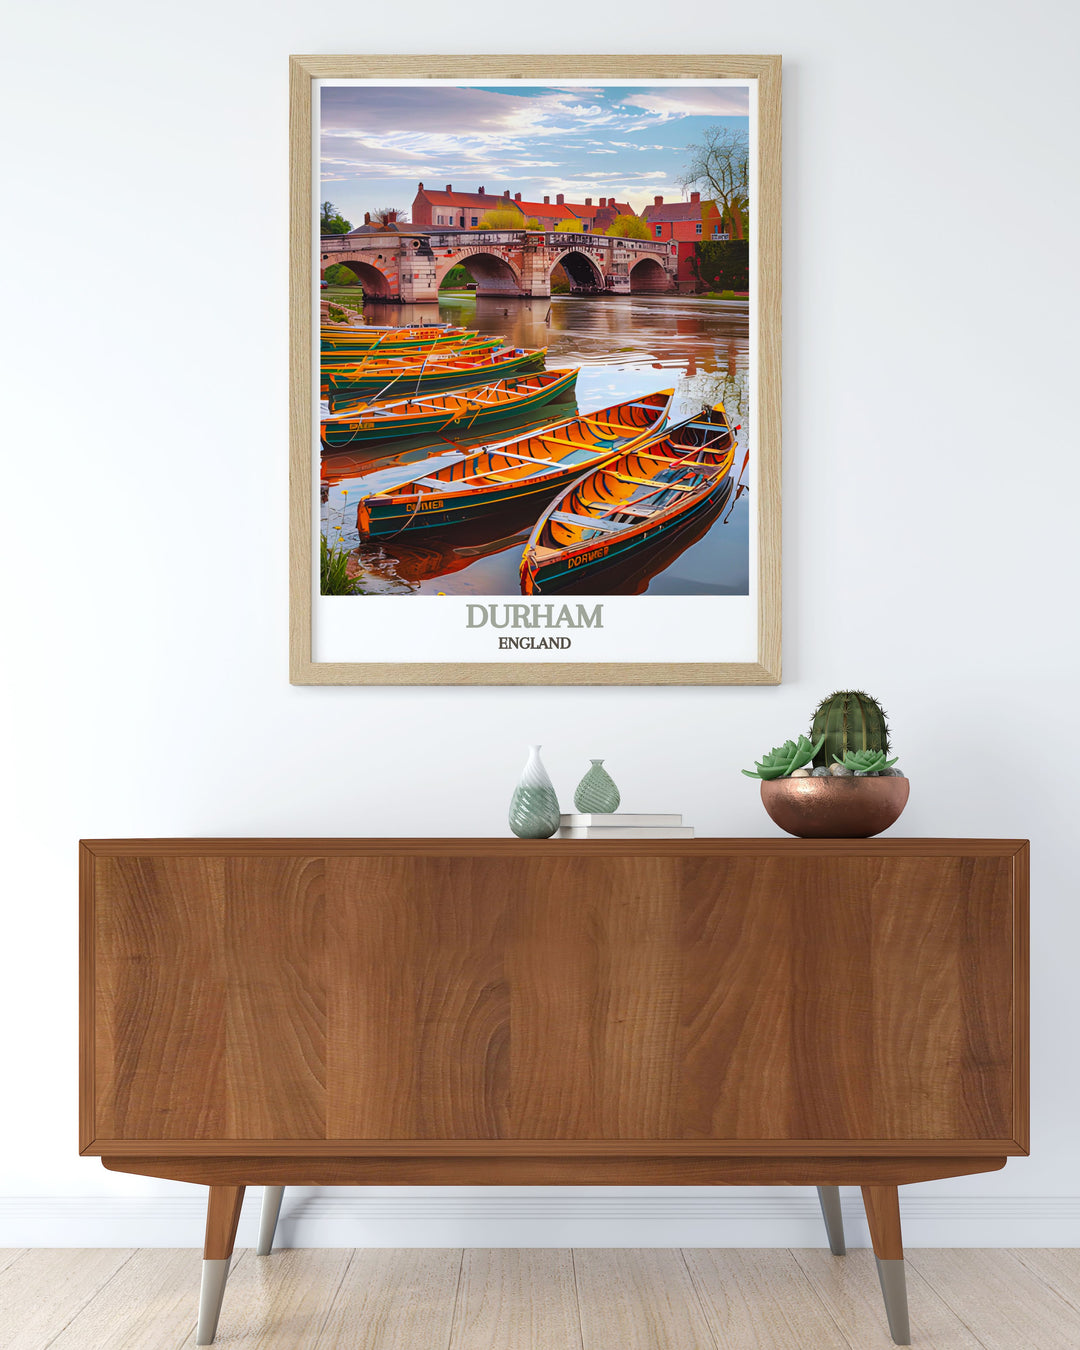 The tranquil beauty of the River Wear and its surrounding greenery are beautifully illustrated in this travel poster, capturing the essence of a peaceful English riverside.